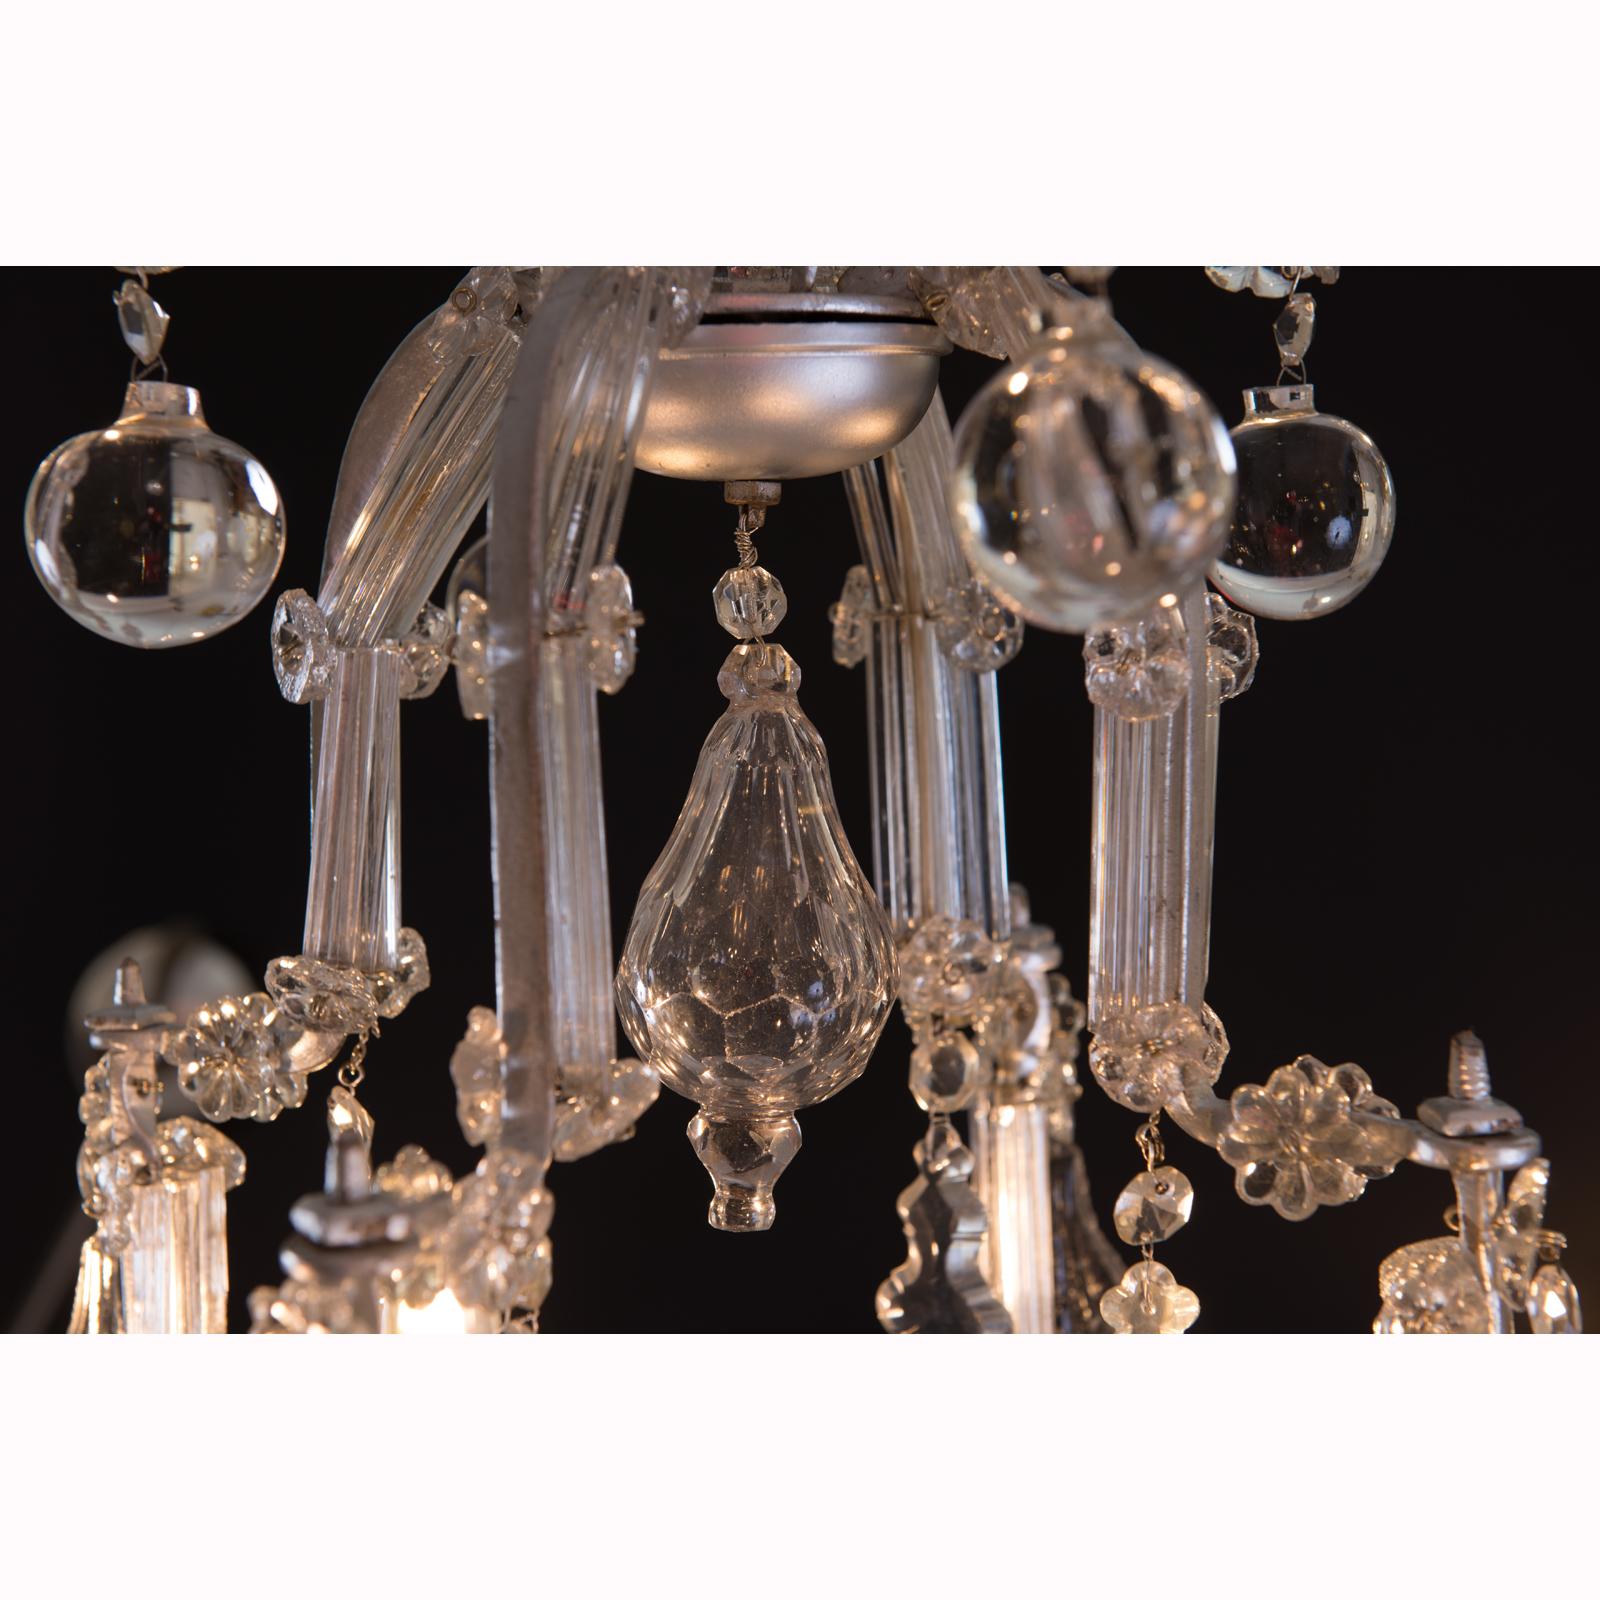 Original Austro, Hungary Baroque Glass Chandelier, 18th Century In Excellent Condition For Sale In Vienna, AT